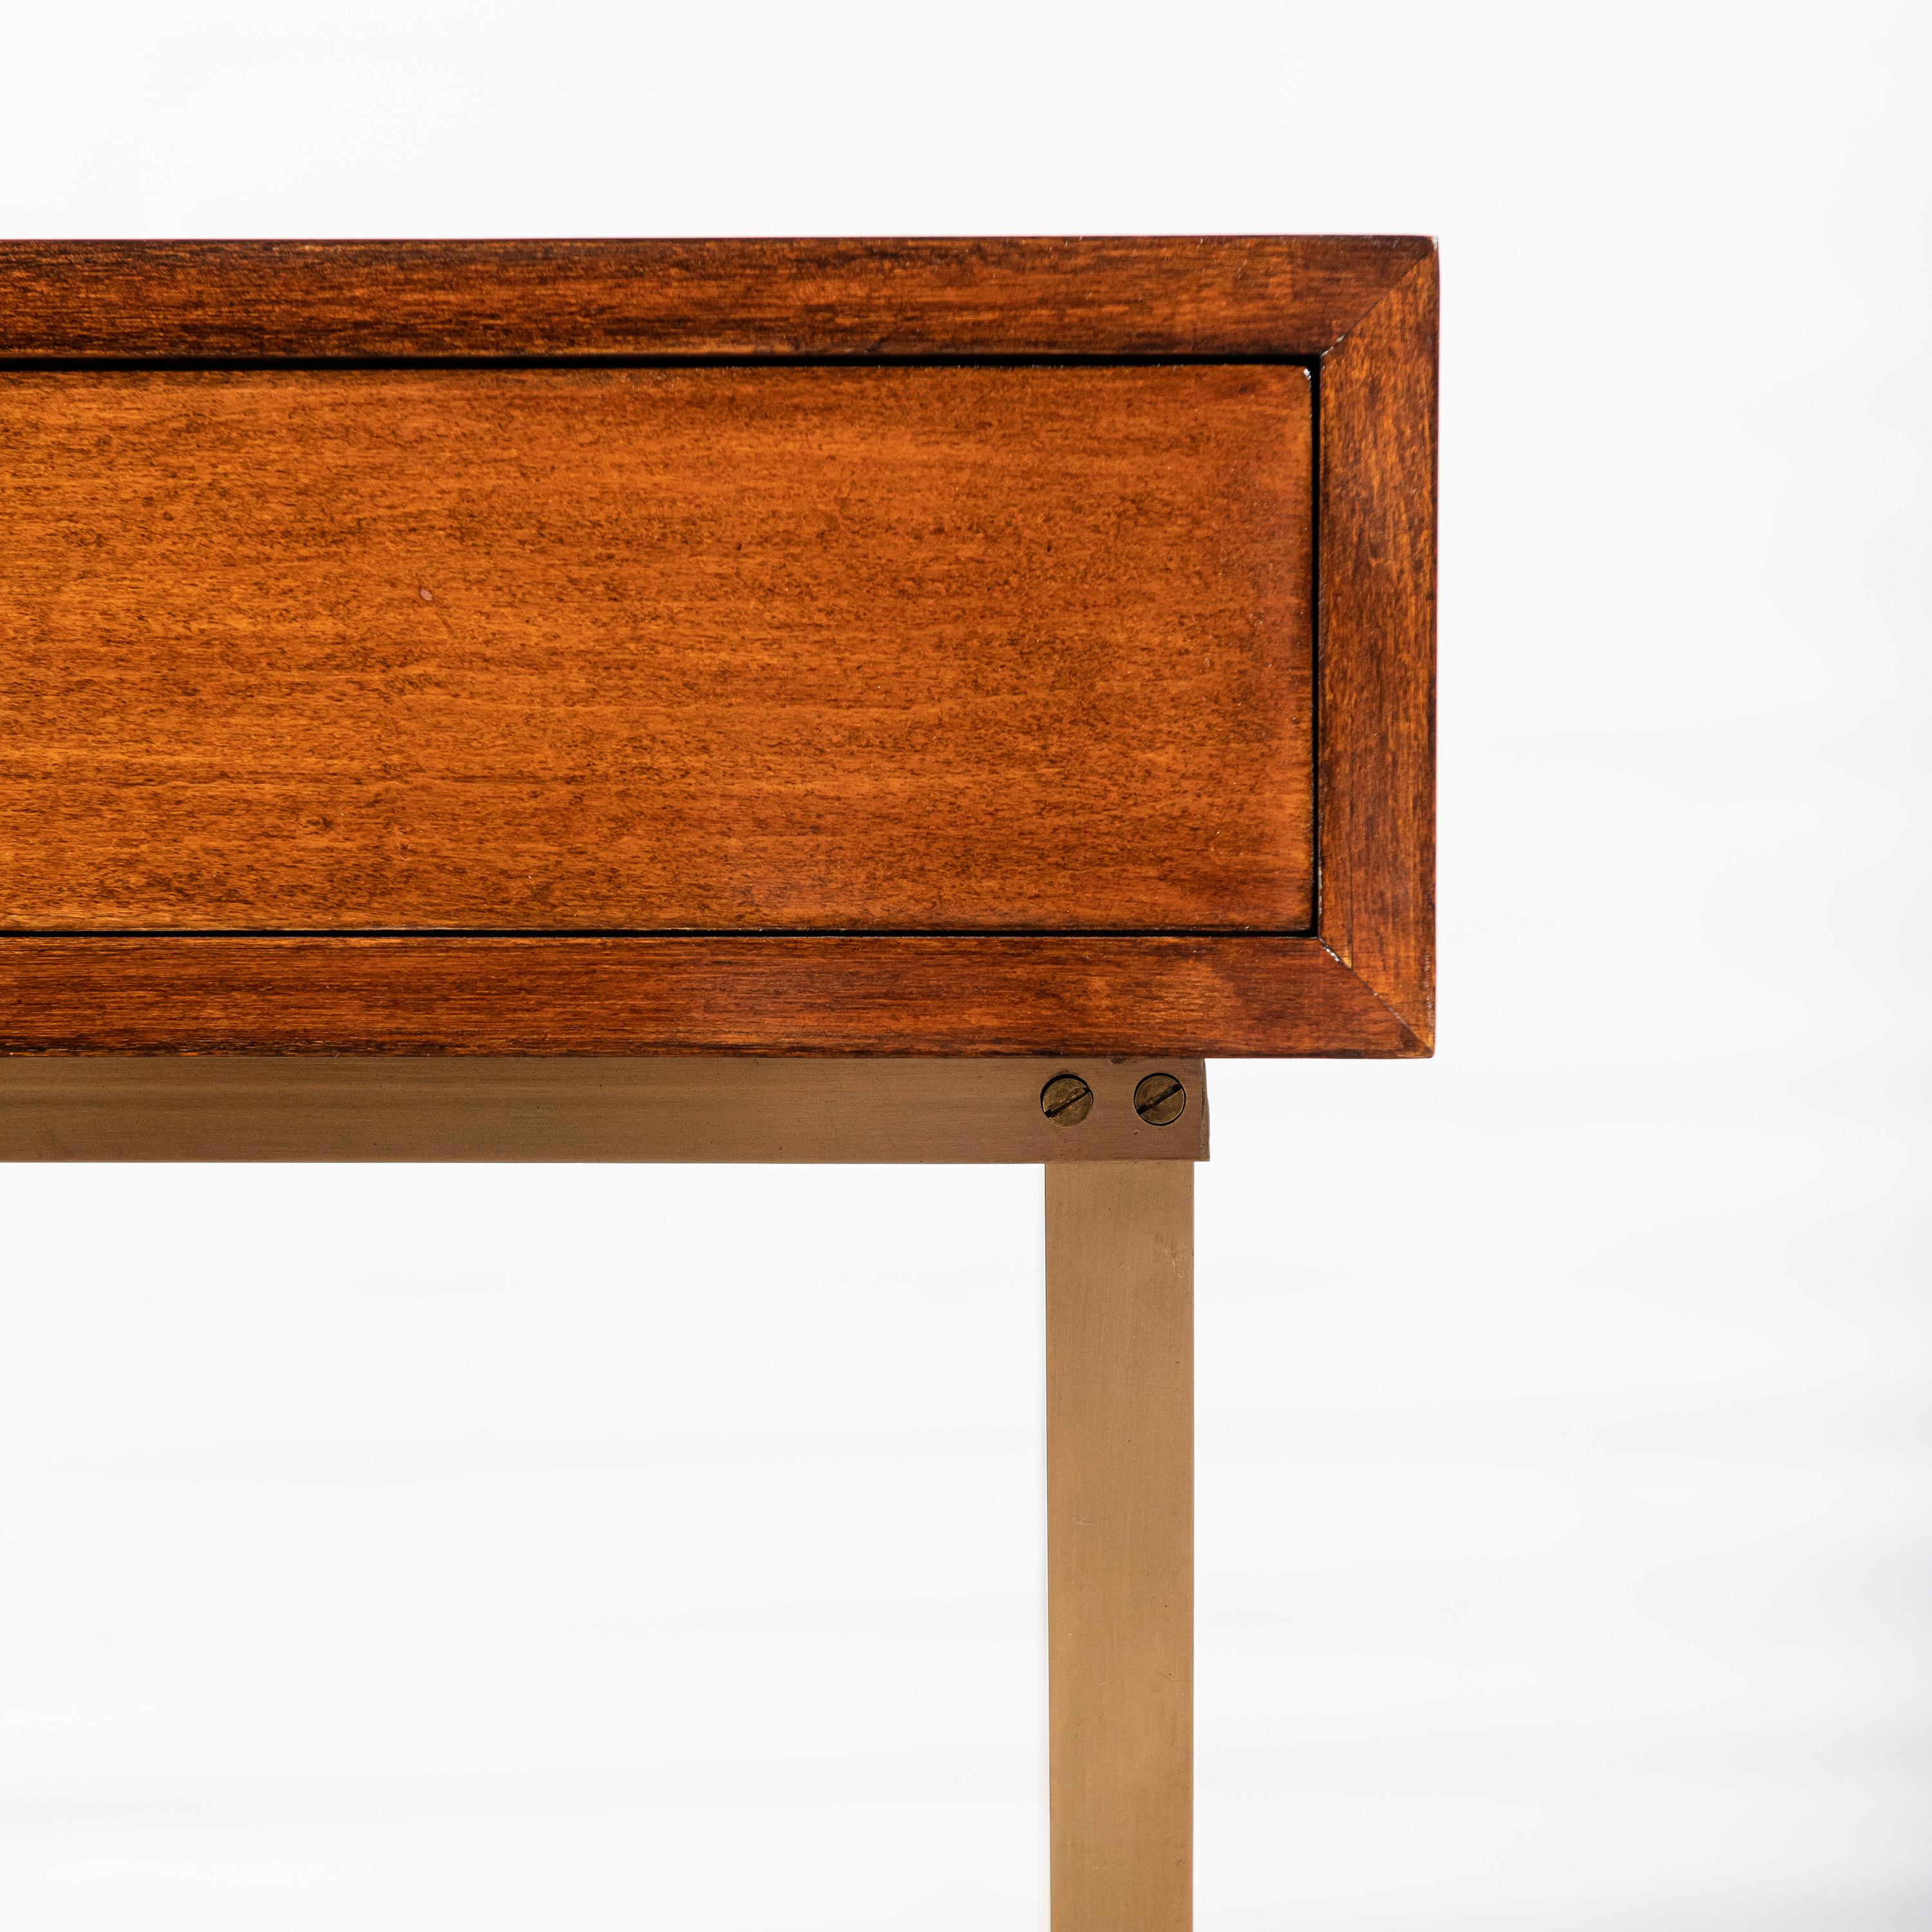 Mid-20th Century Wood and Bronze Console Table by Comte, Argentina, Buenos Aires, circa 1950 For Sale